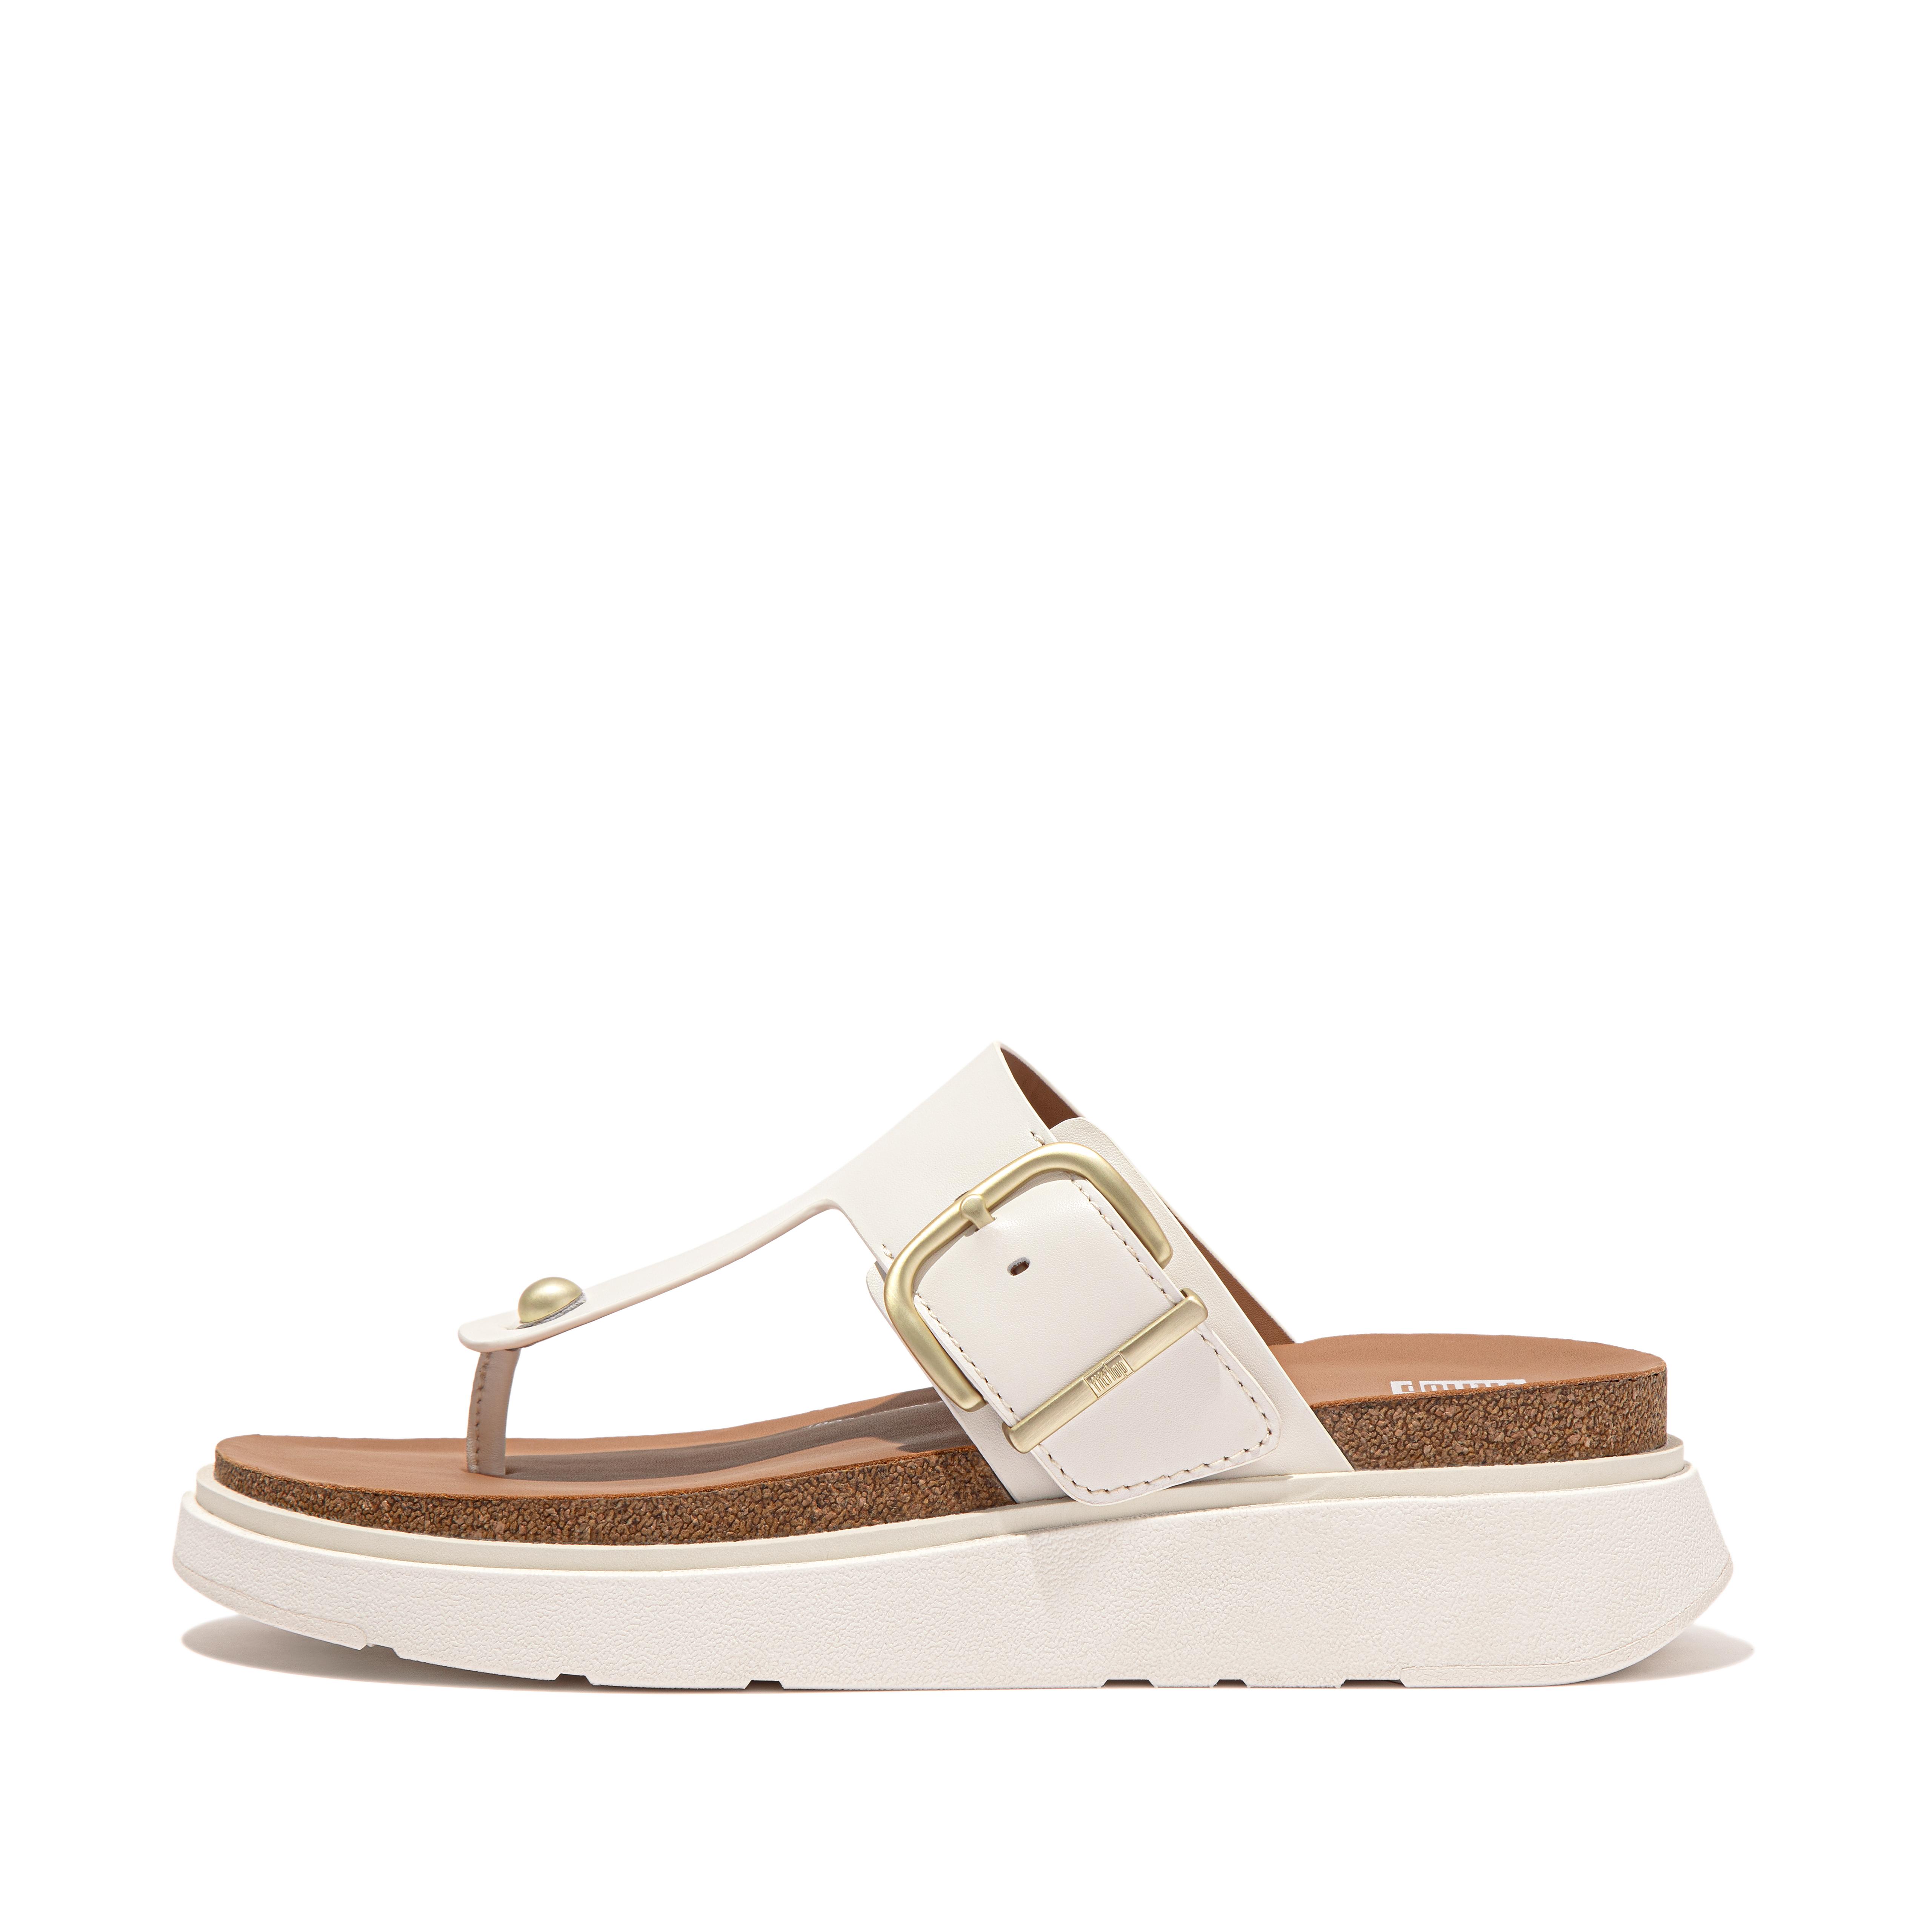 Fitflop Buckle Leather Toe-Post Sandals,Urban White